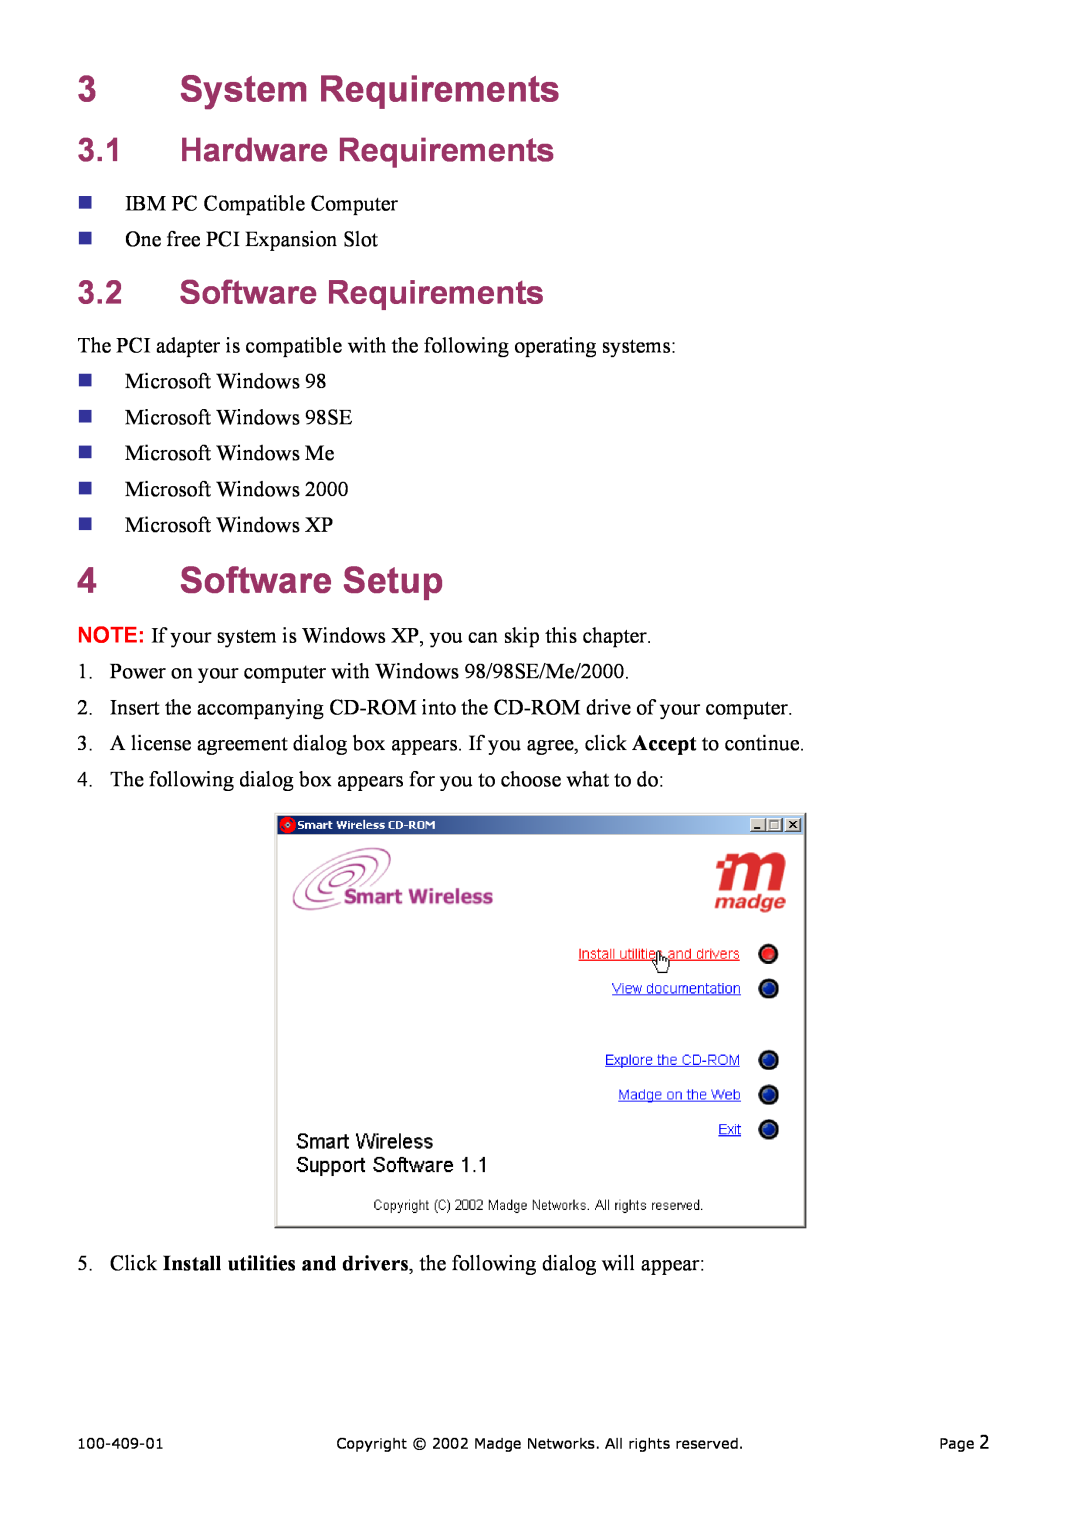 Madge Networks 802.11B (95-20) manual System Requirements, Software Setup, Hardware Requirements, Software Requirements 